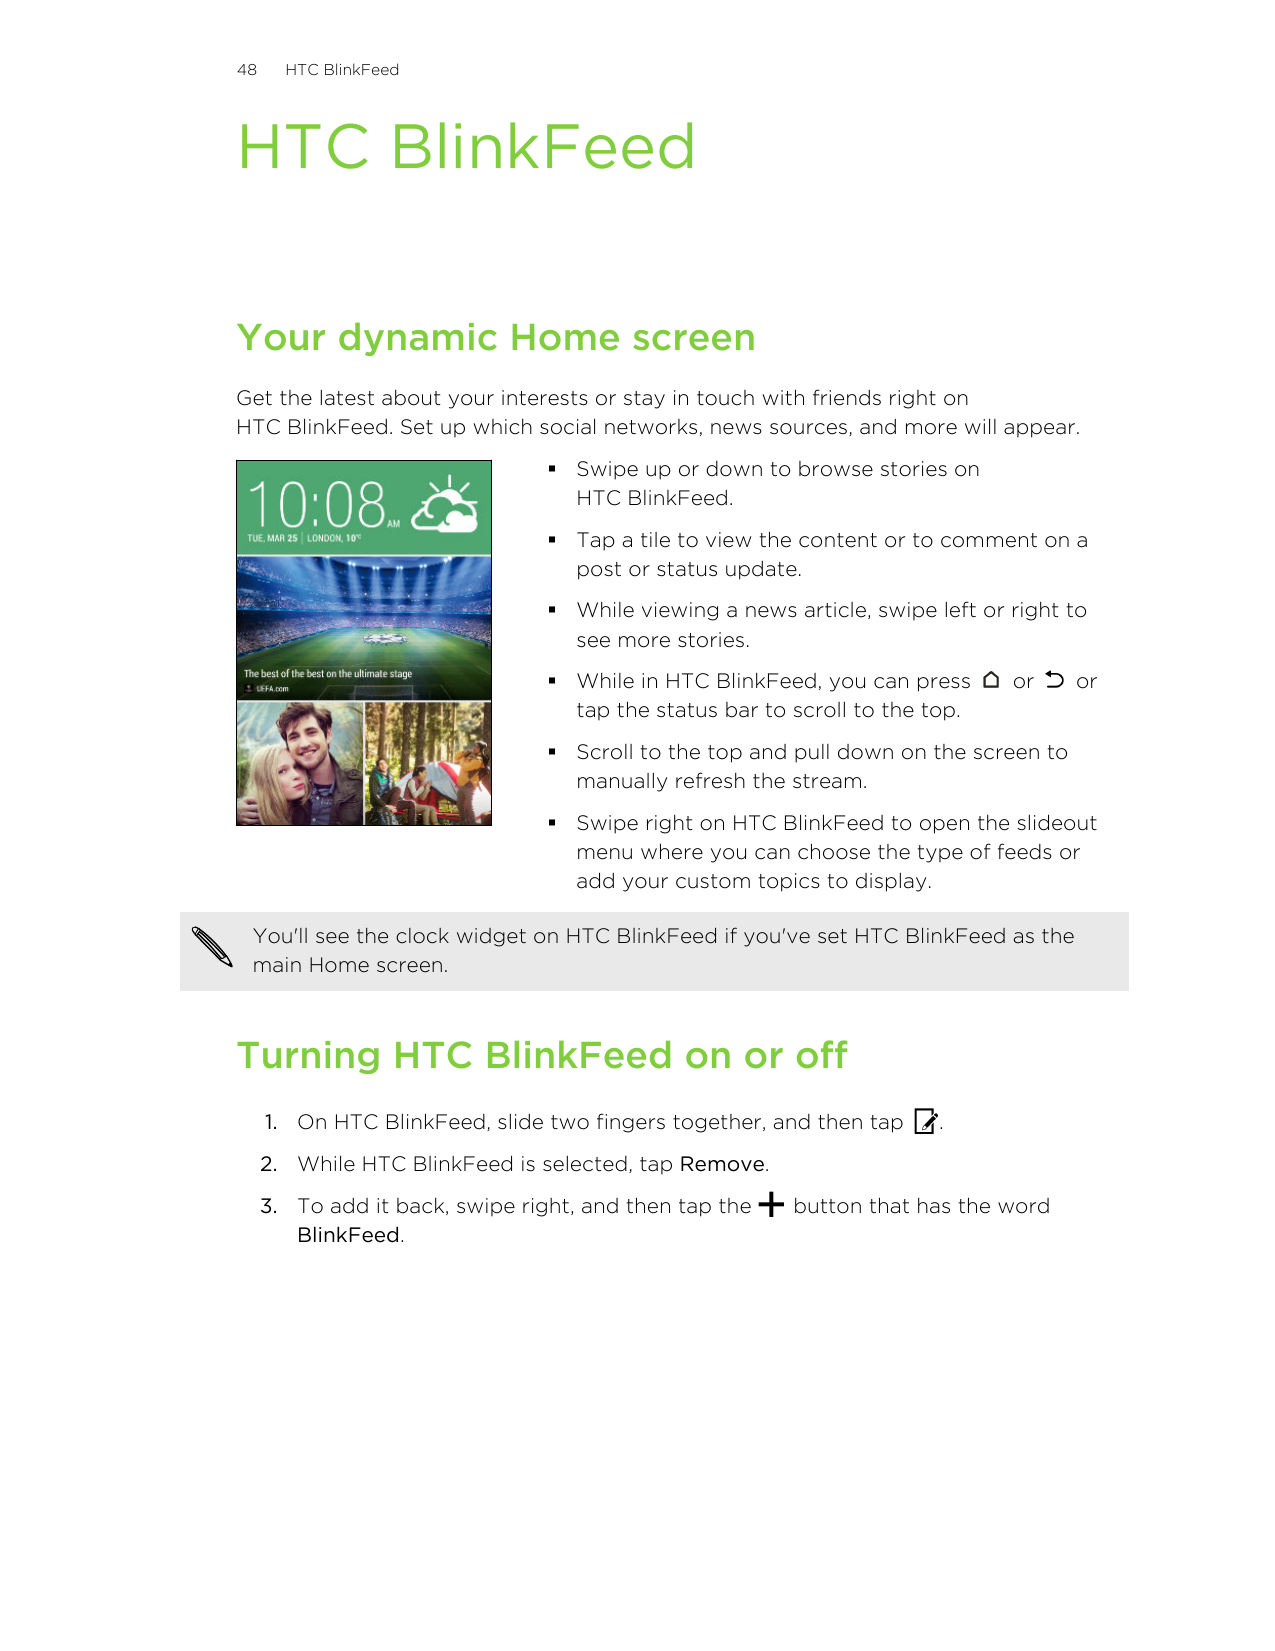 48HTC BlinkFeedHTC BlinkFeedYour dynamic Home screenGet the latest about your interests or stay in touch with friends right onHT